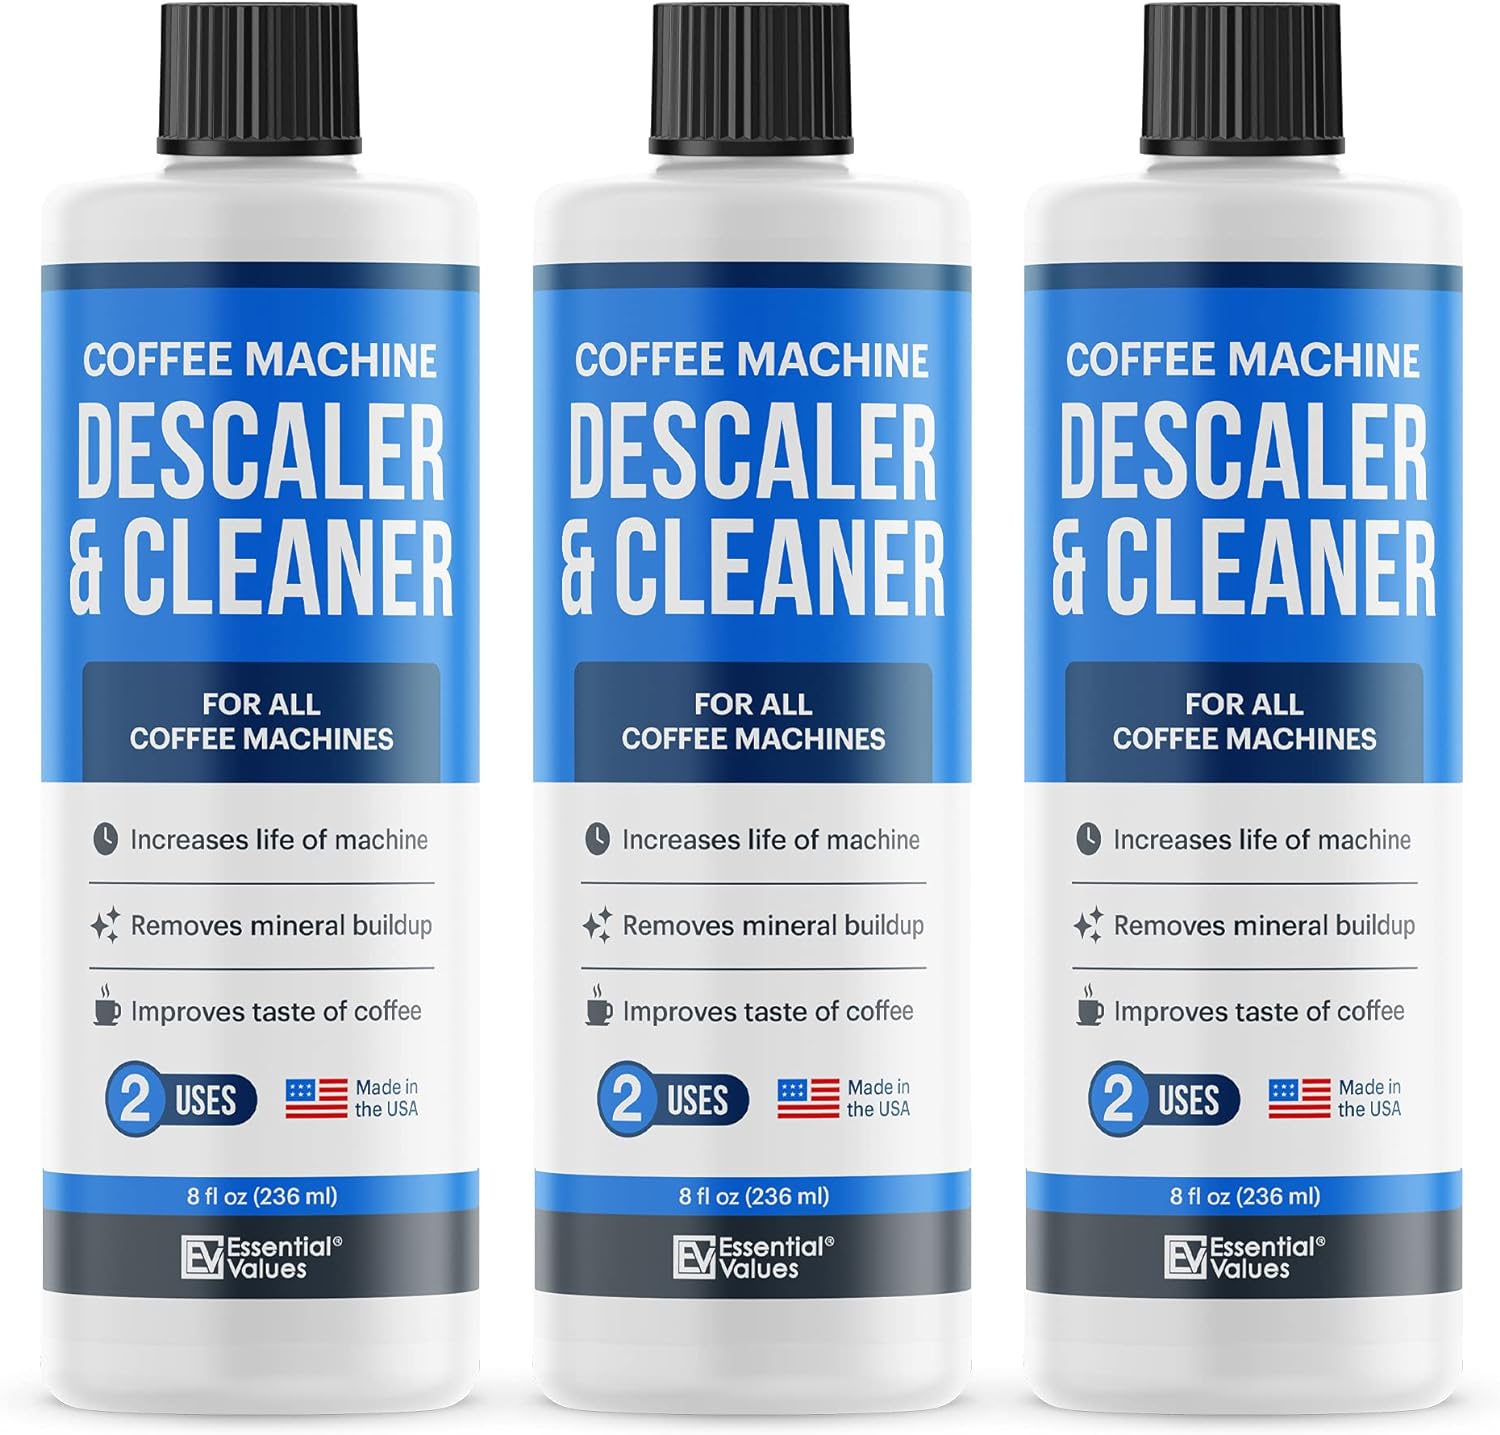 Limited-Time Offer: Descaling Solution (6 Uses) - Coffee Machine Descaler Cleaner